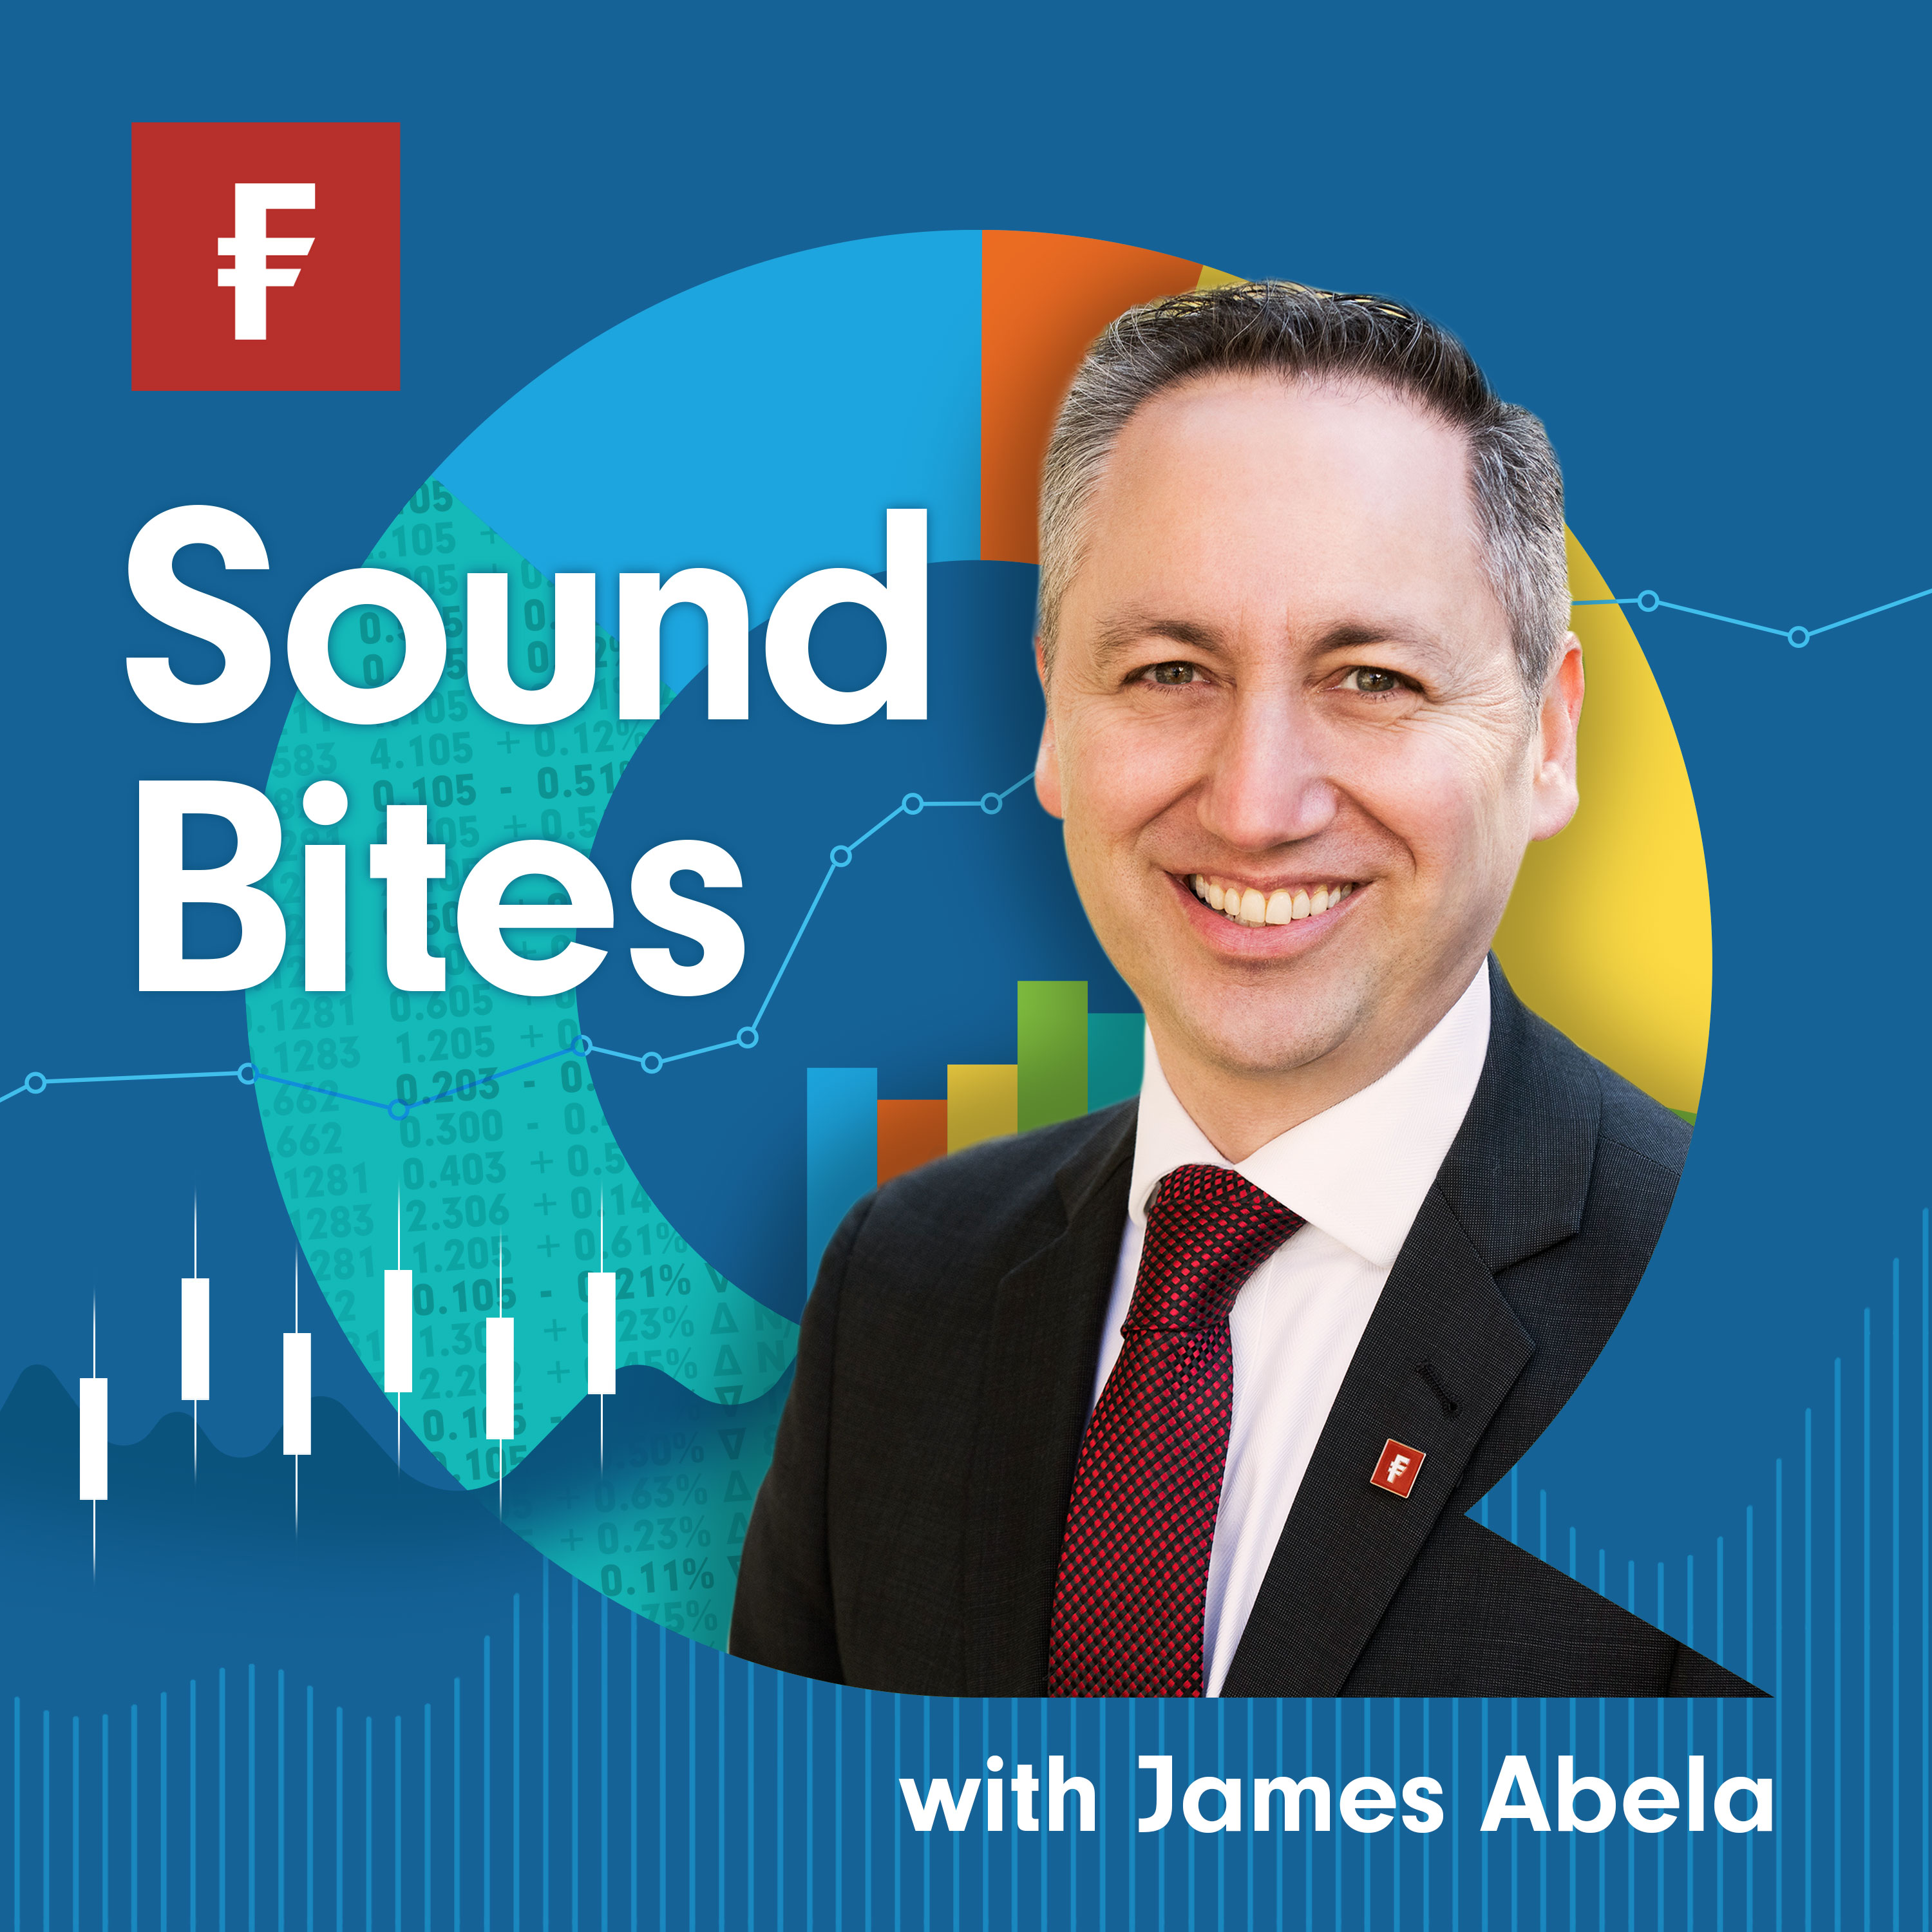 James Abela | A decade of finding future leaders and why traditional value stocks aren’t working